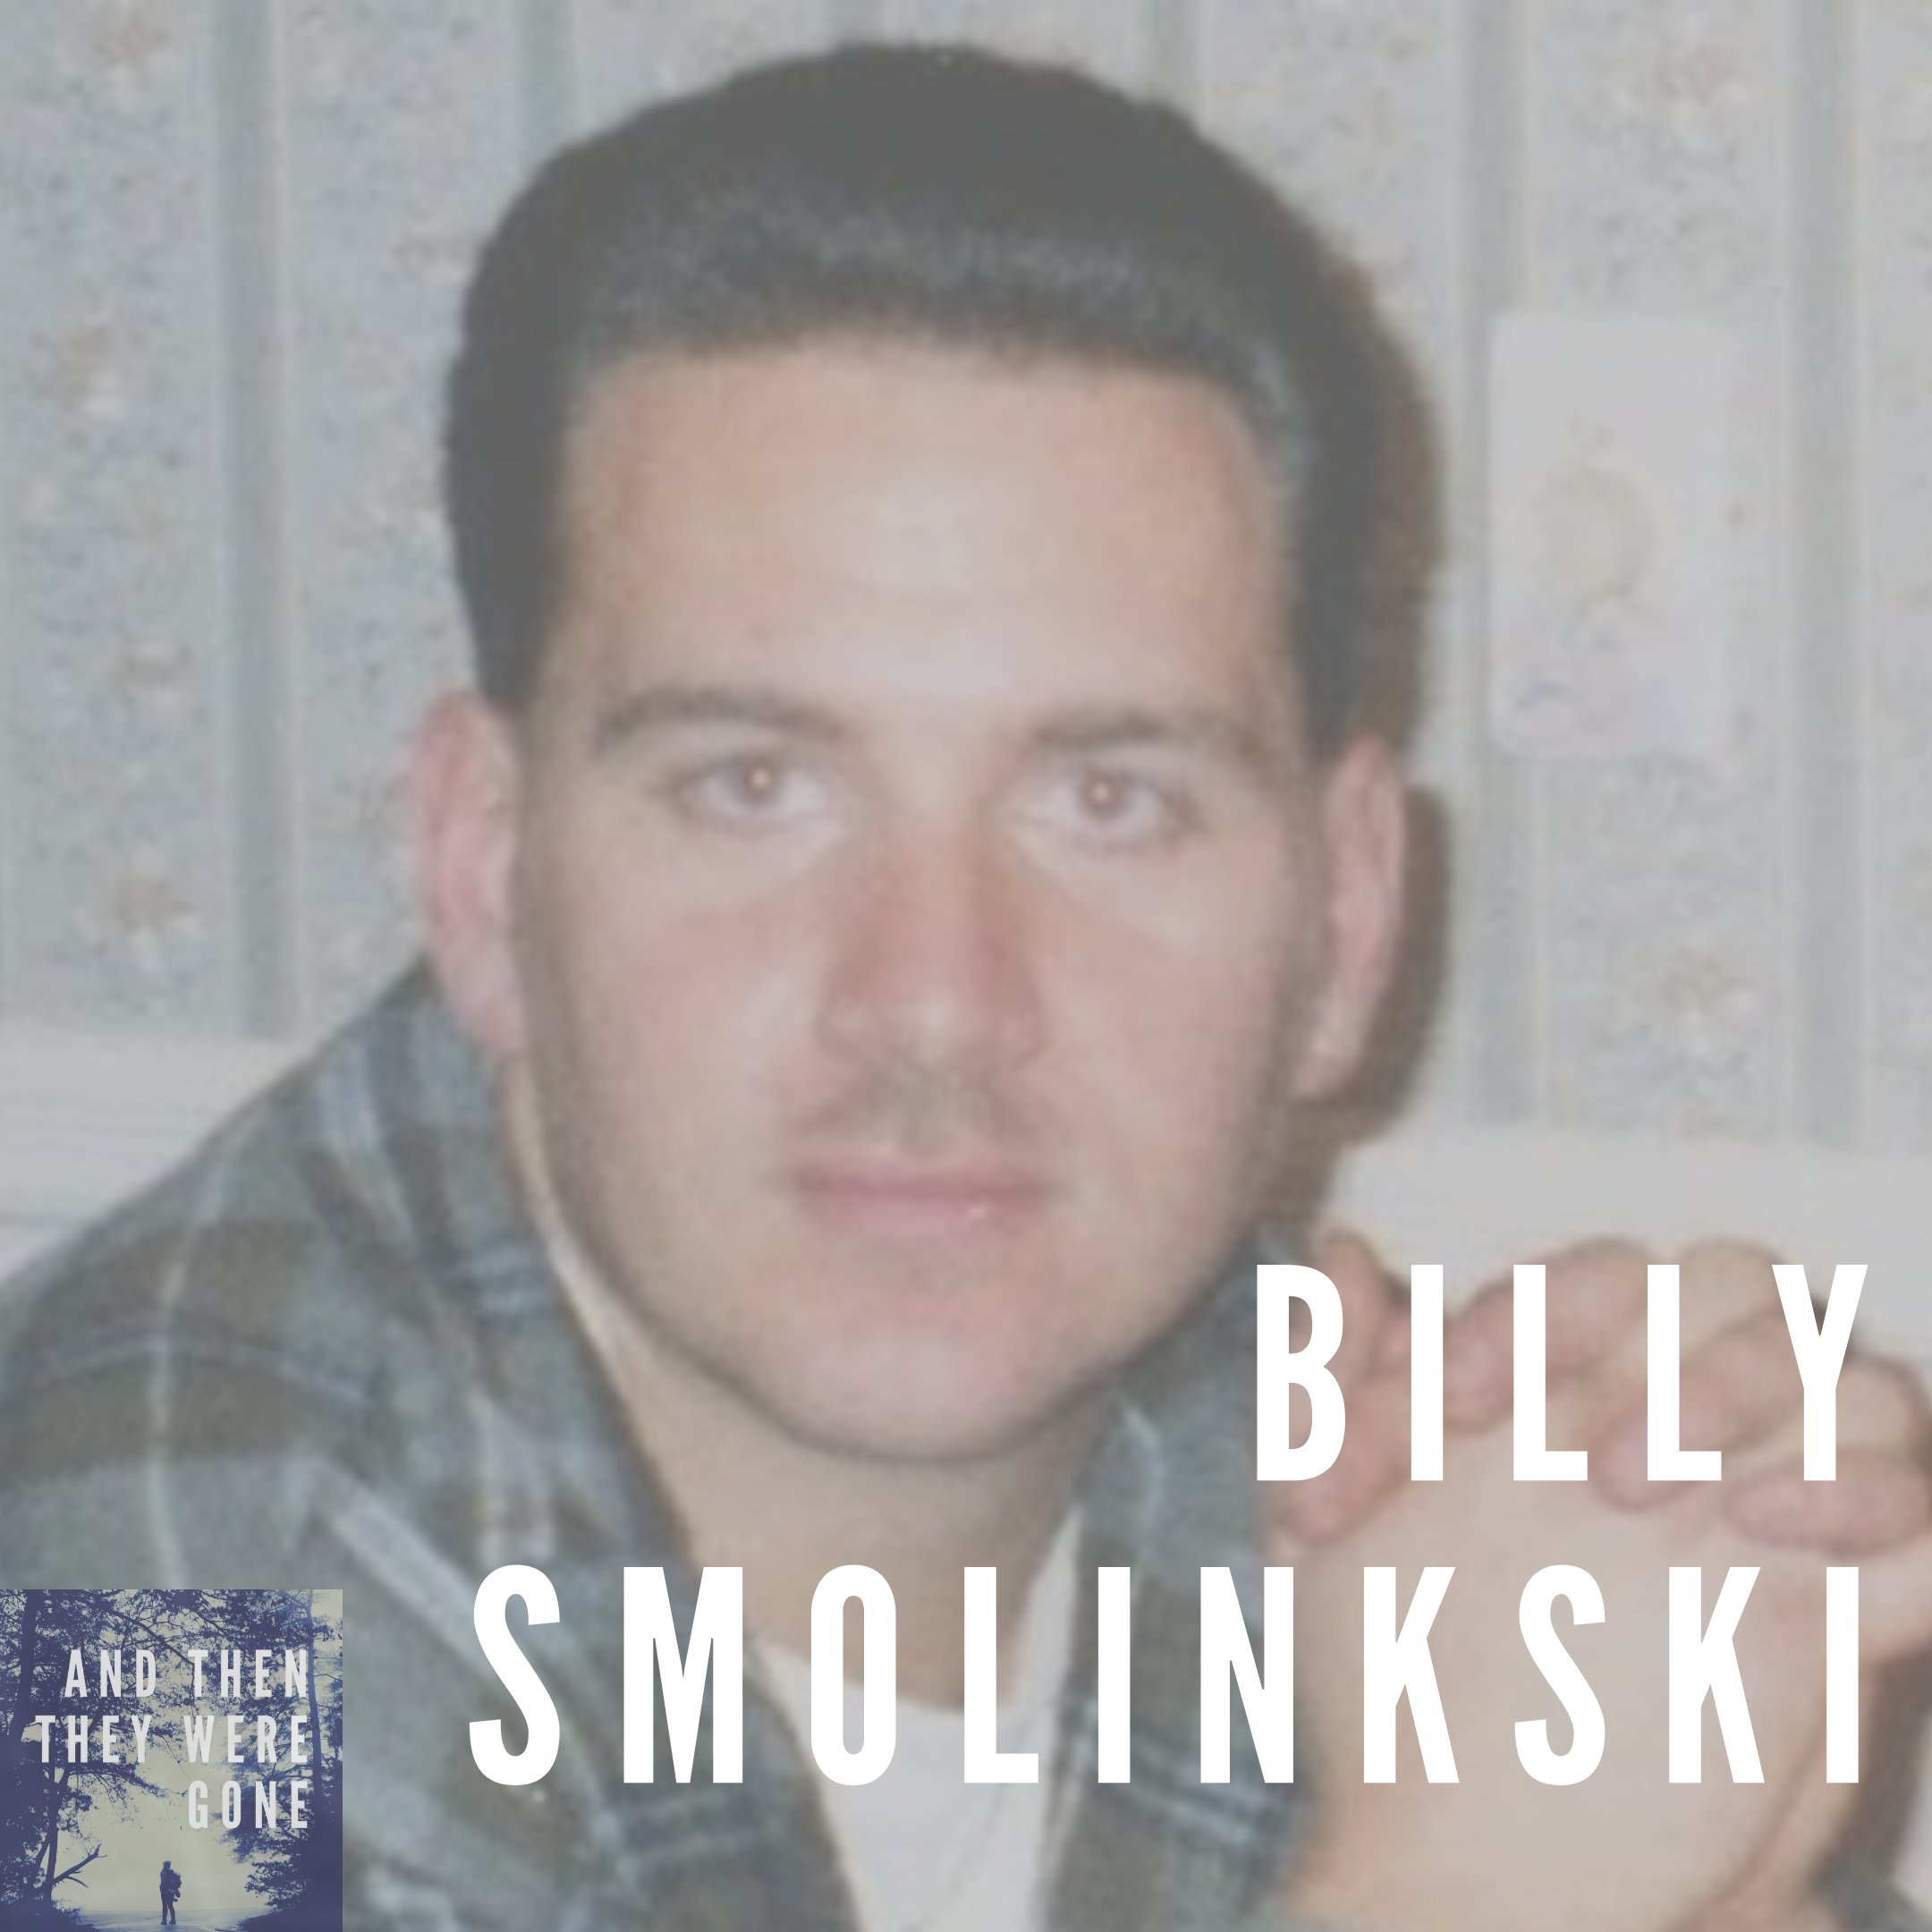 Billy Smolinski has been missing from Waterbury, CT since August 28, 2004